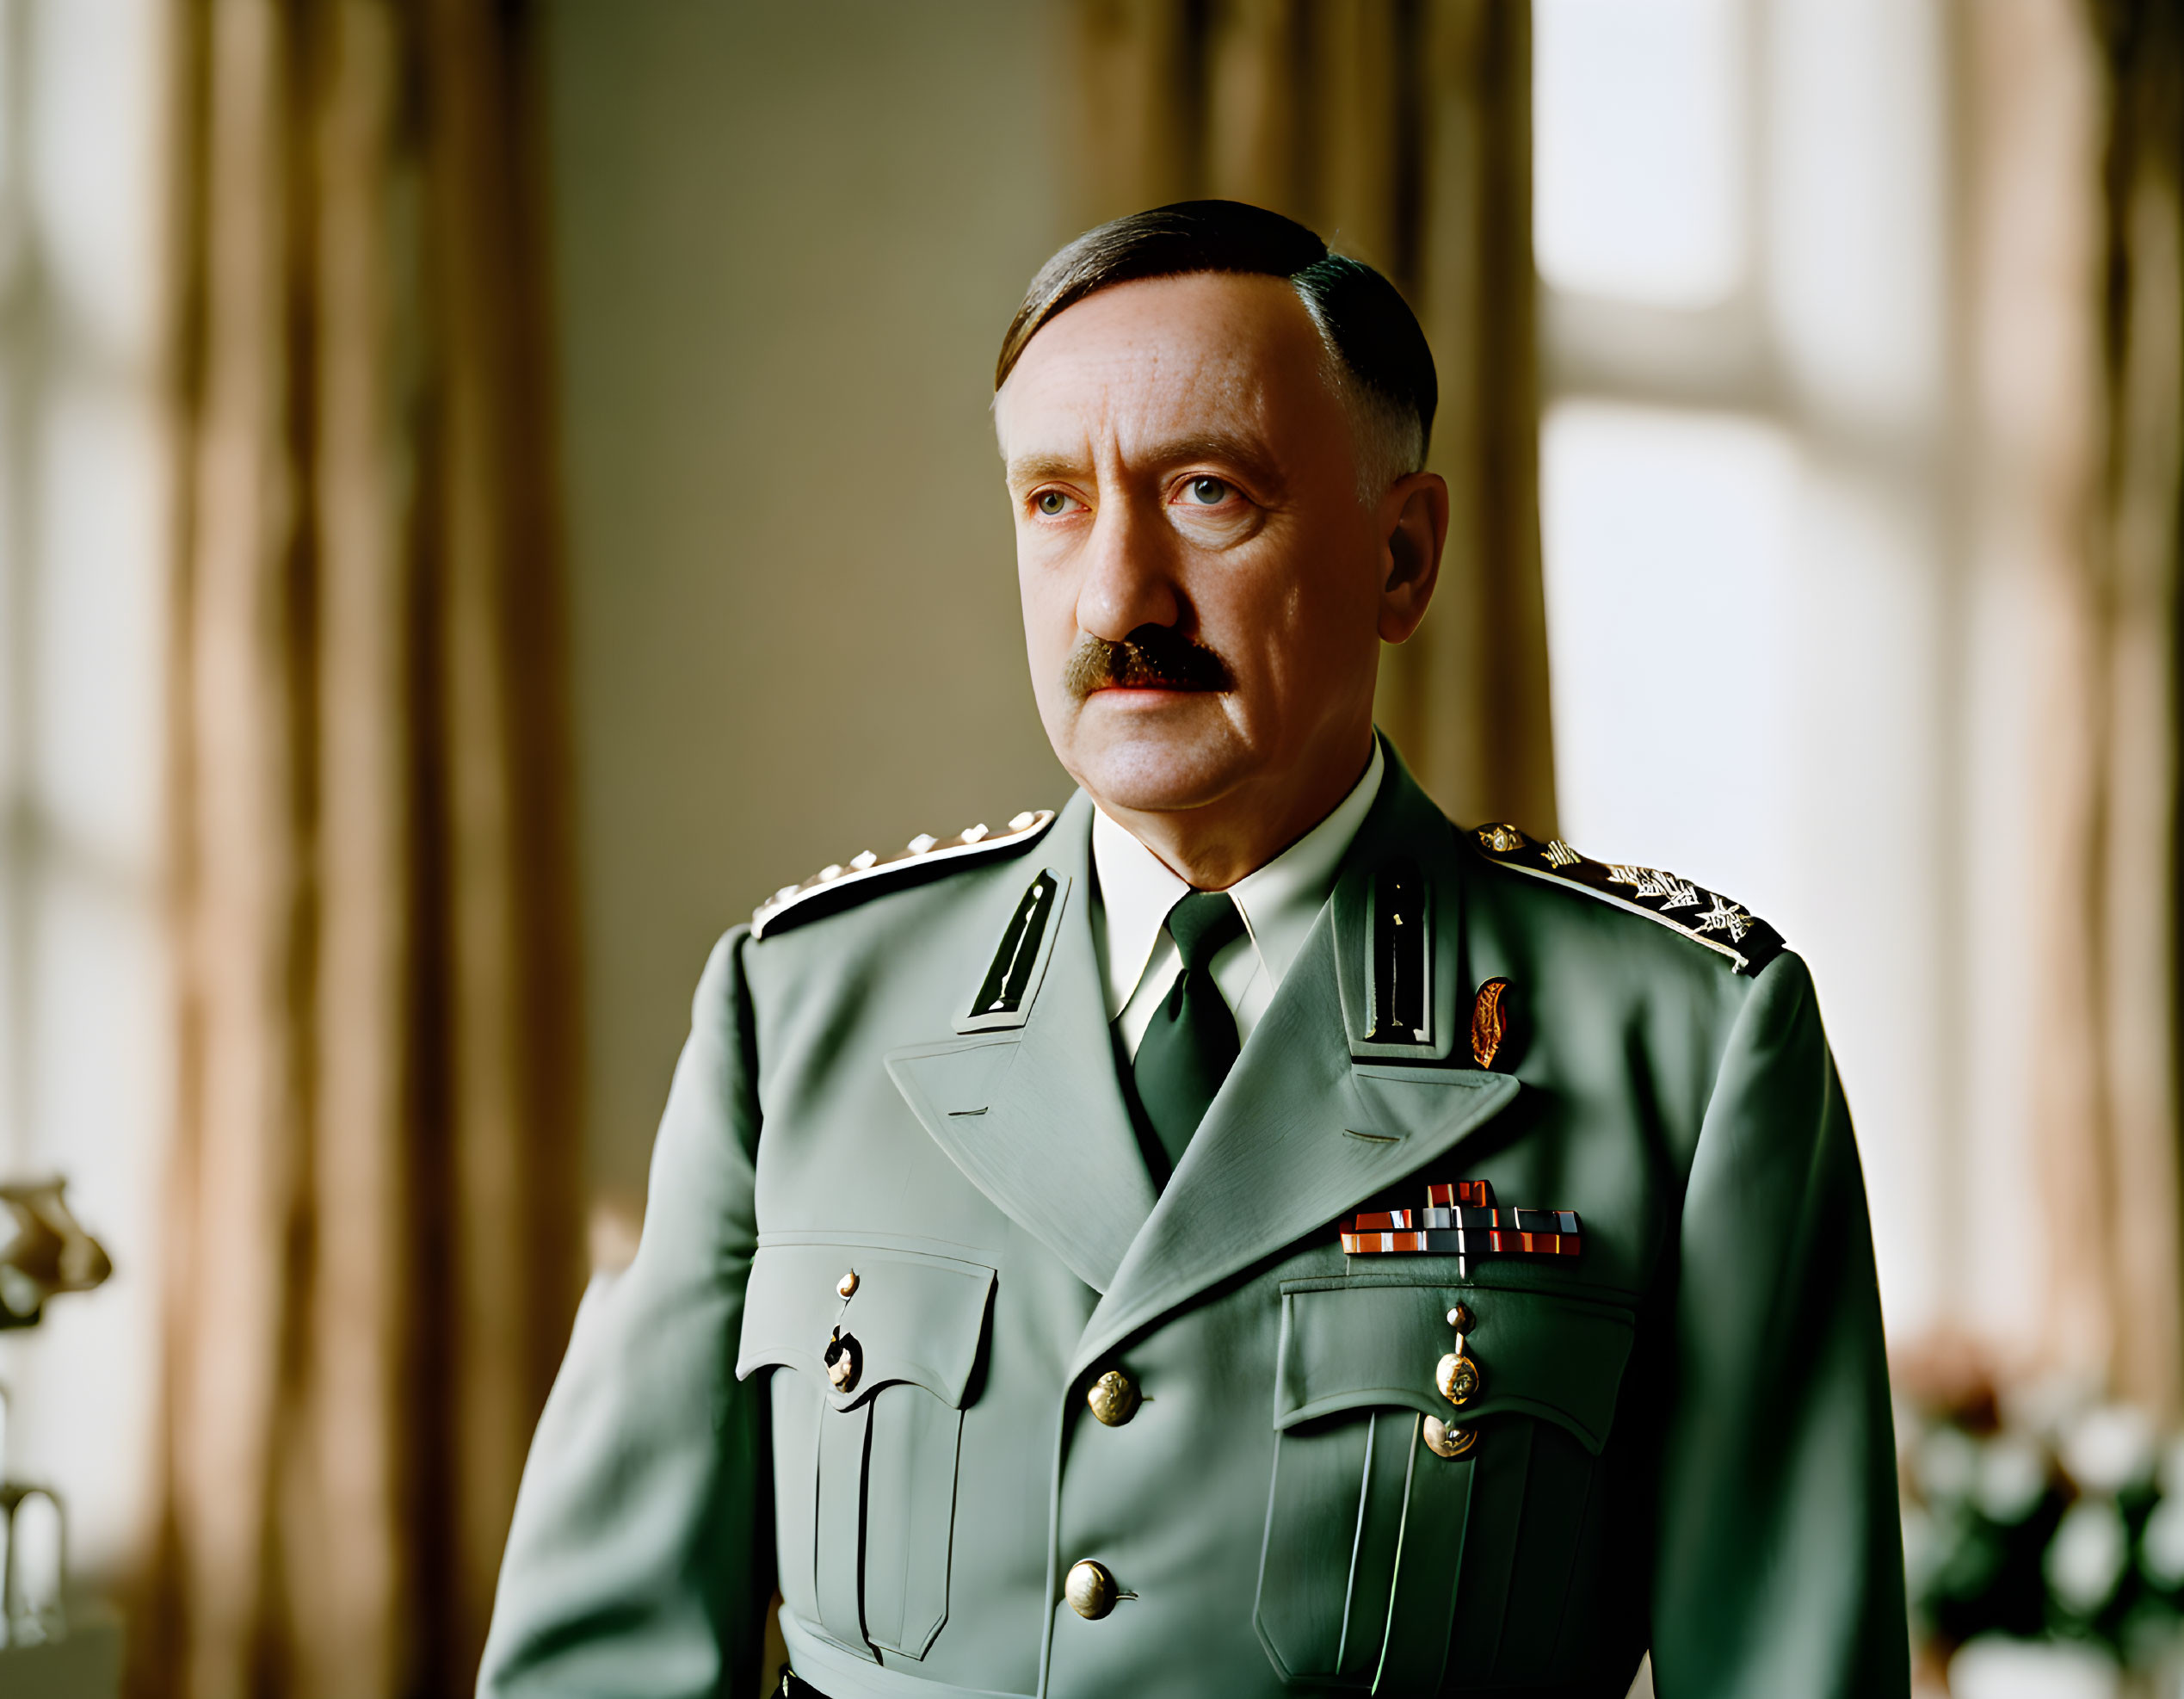 Military man with medals in serious expression by window